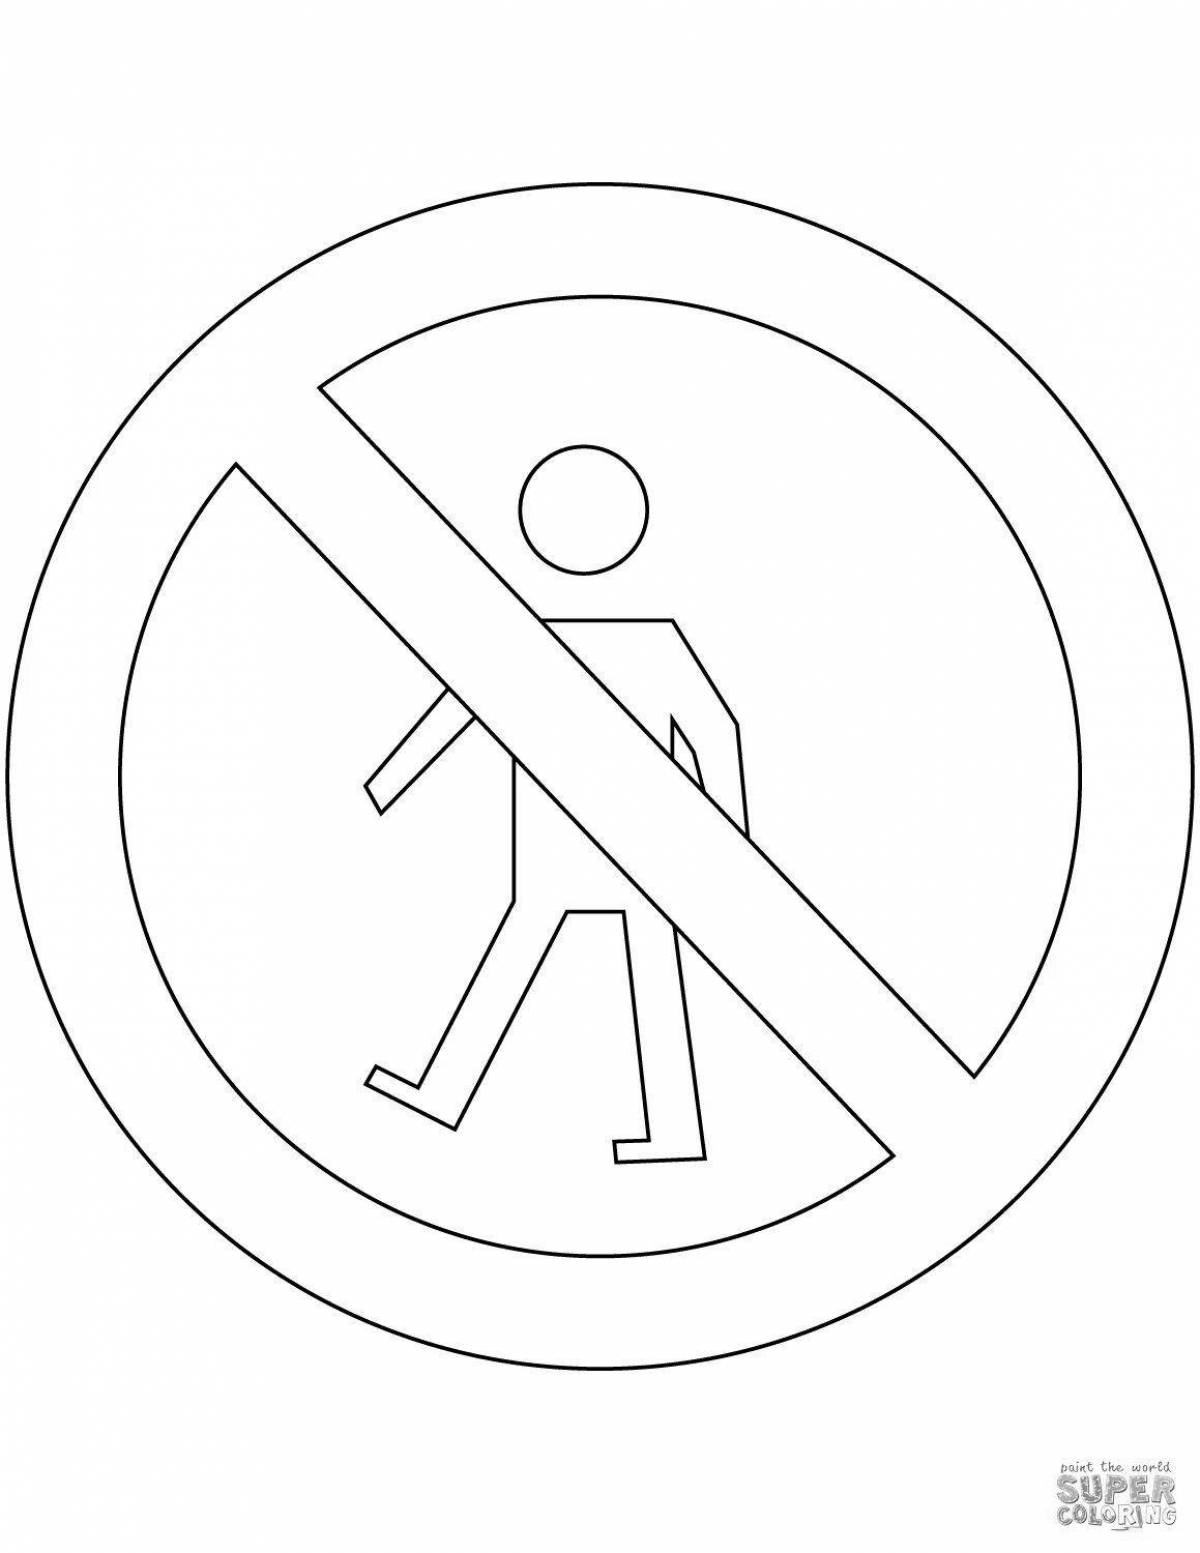 Playful no traffic signs coloring page